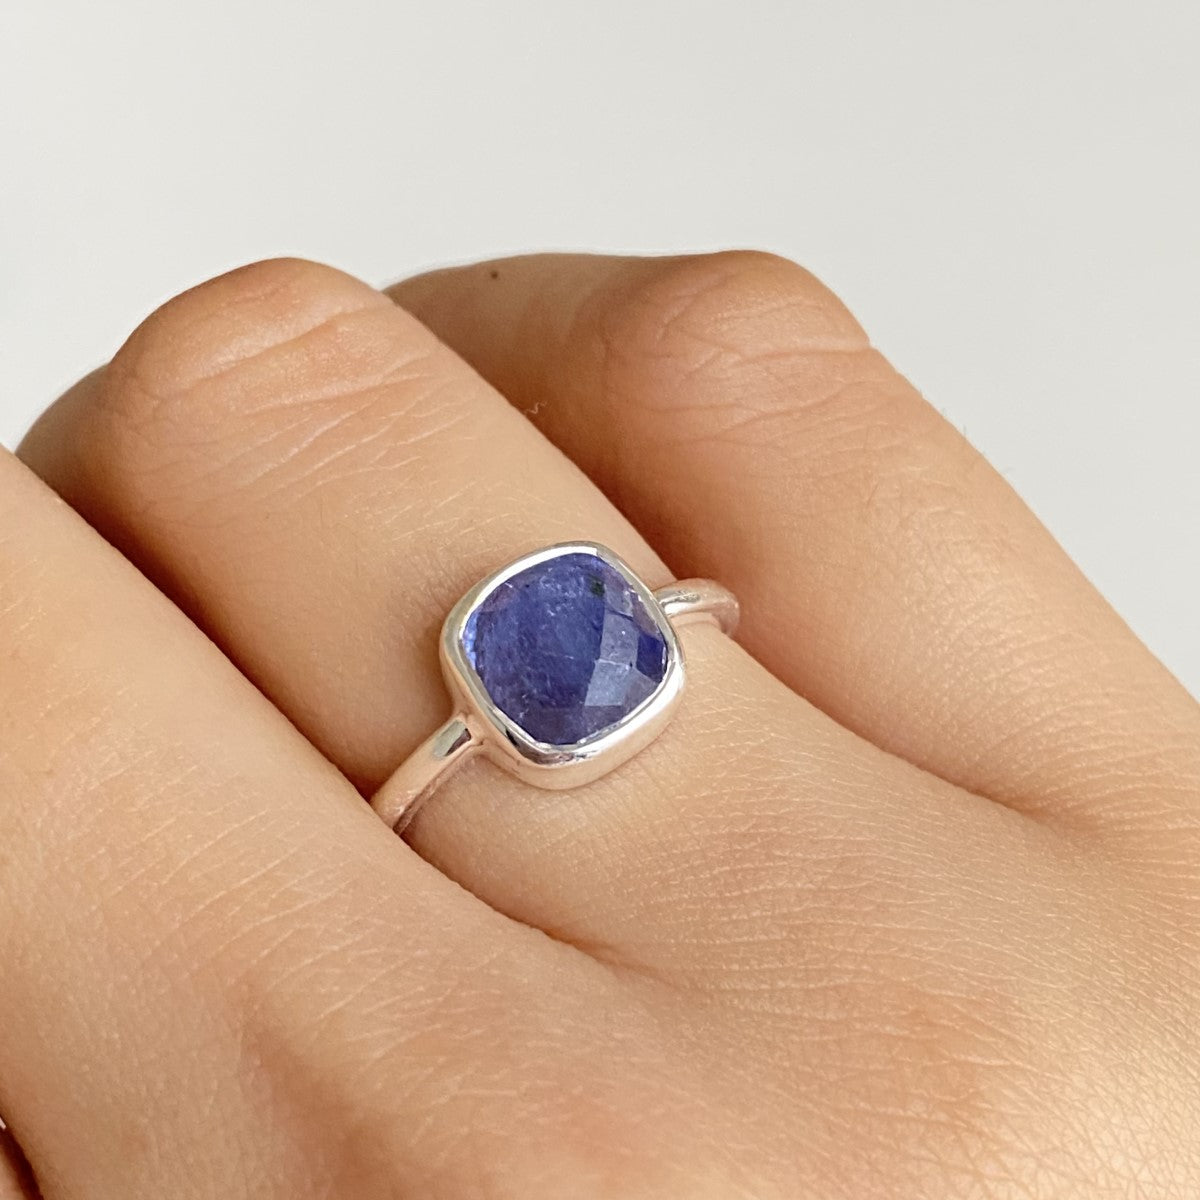 Faceted Square Cut Natural Gemstone Sterling Silver Solitaire Ring - Tanzanite